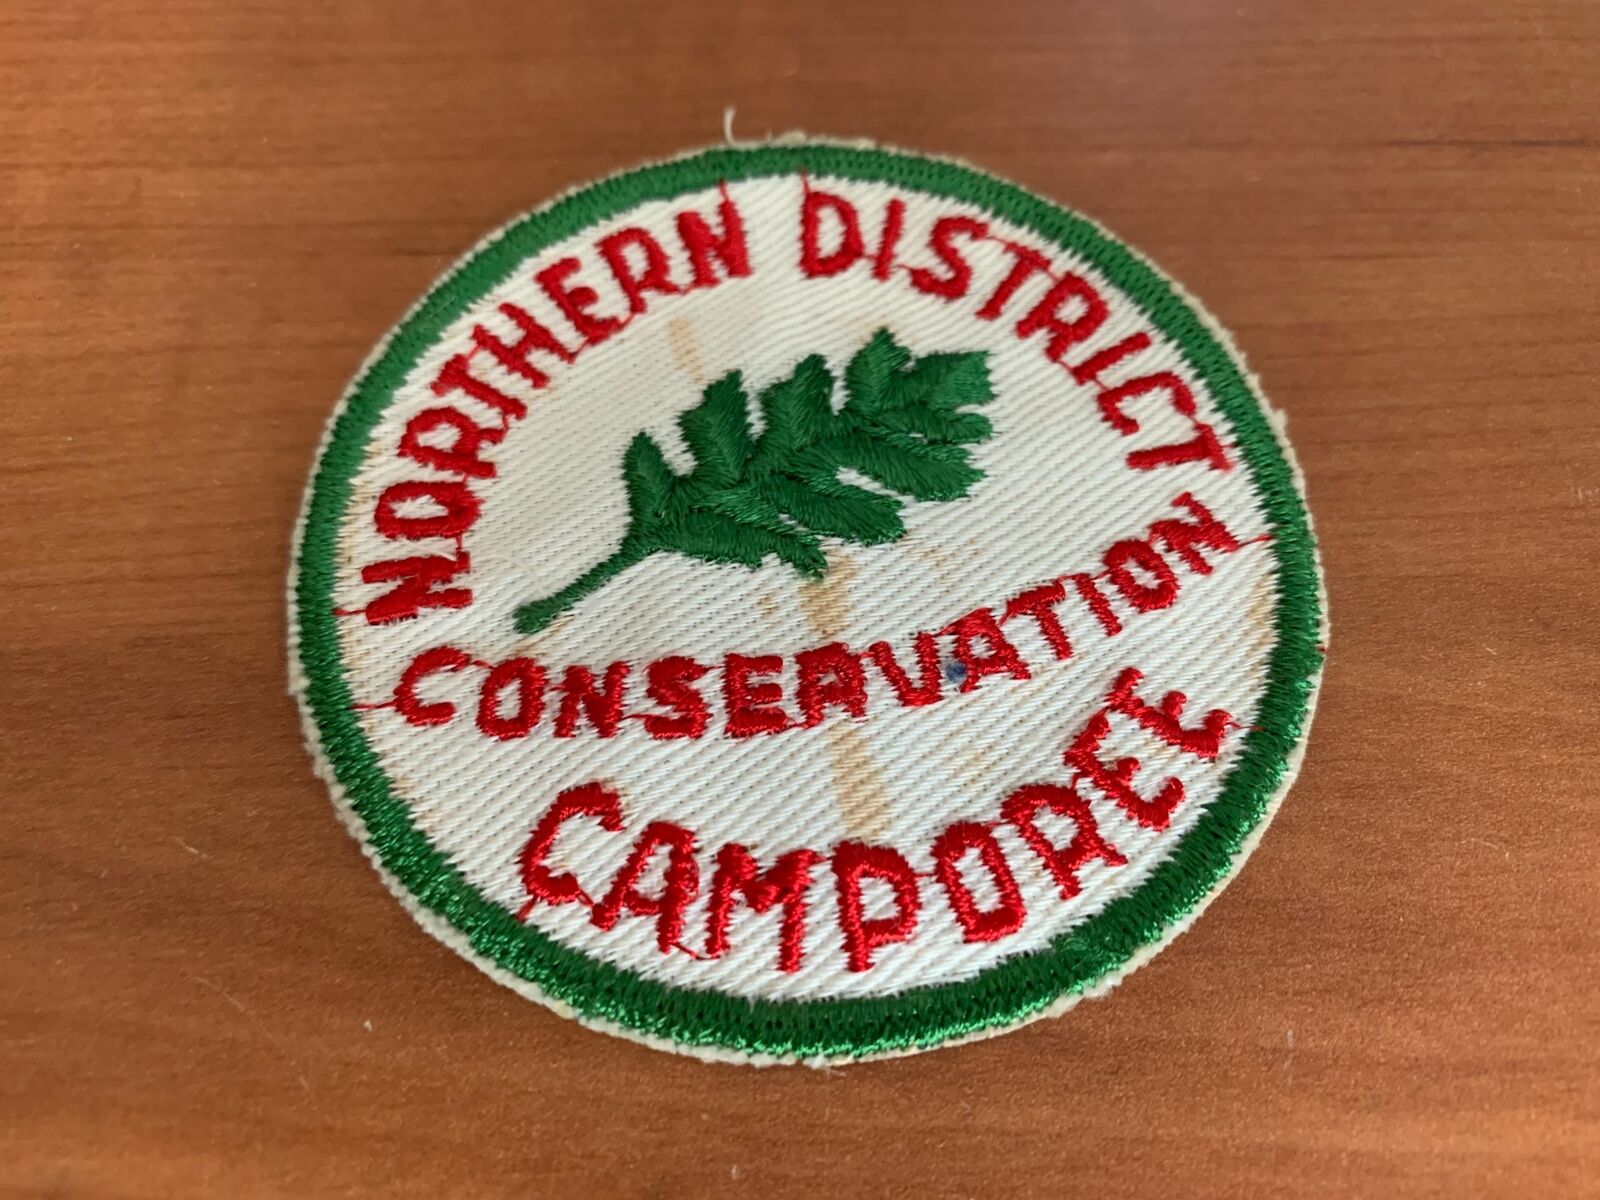 BSA, 1950’s Northern District Conservation Camporee Patch, Philadelphia Council